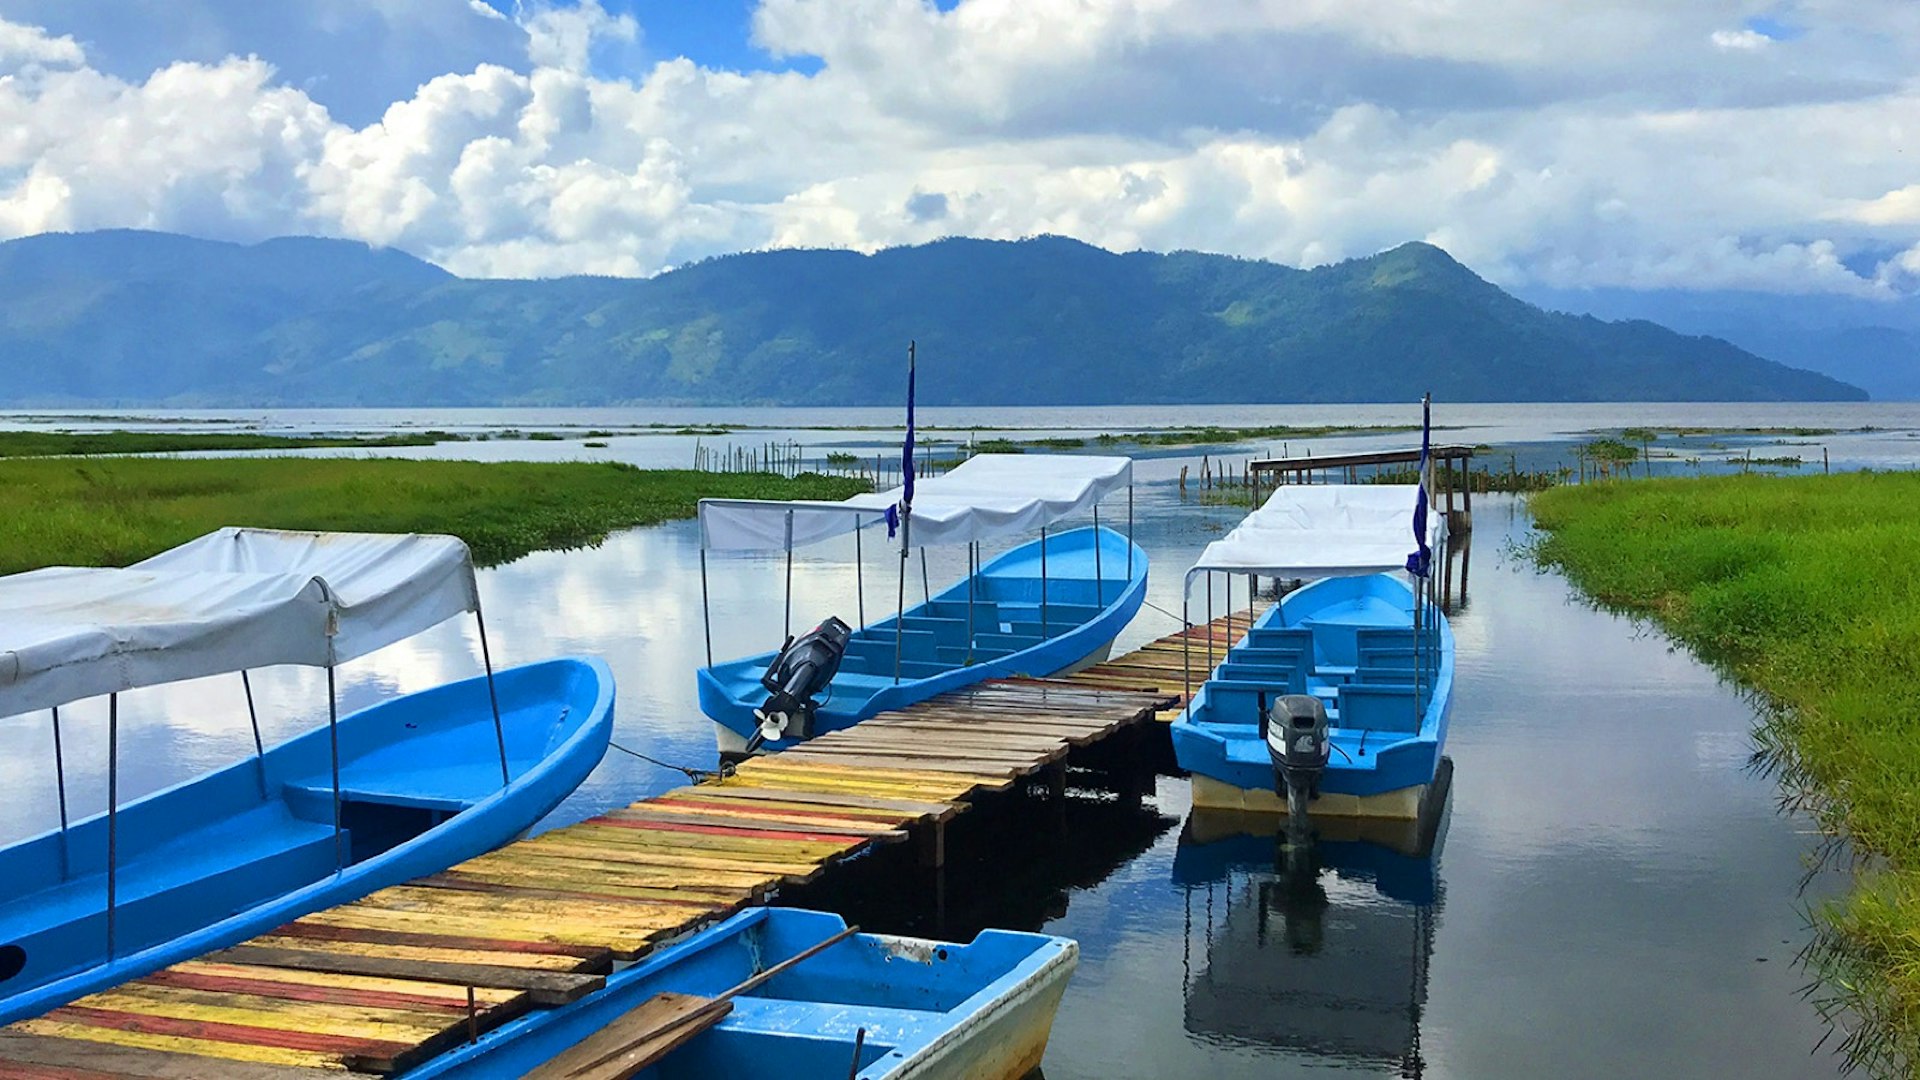 A collection of boats sit docked in Lake Yojoa in Honduras © Erik R. Trinidad / Lonely Planet 